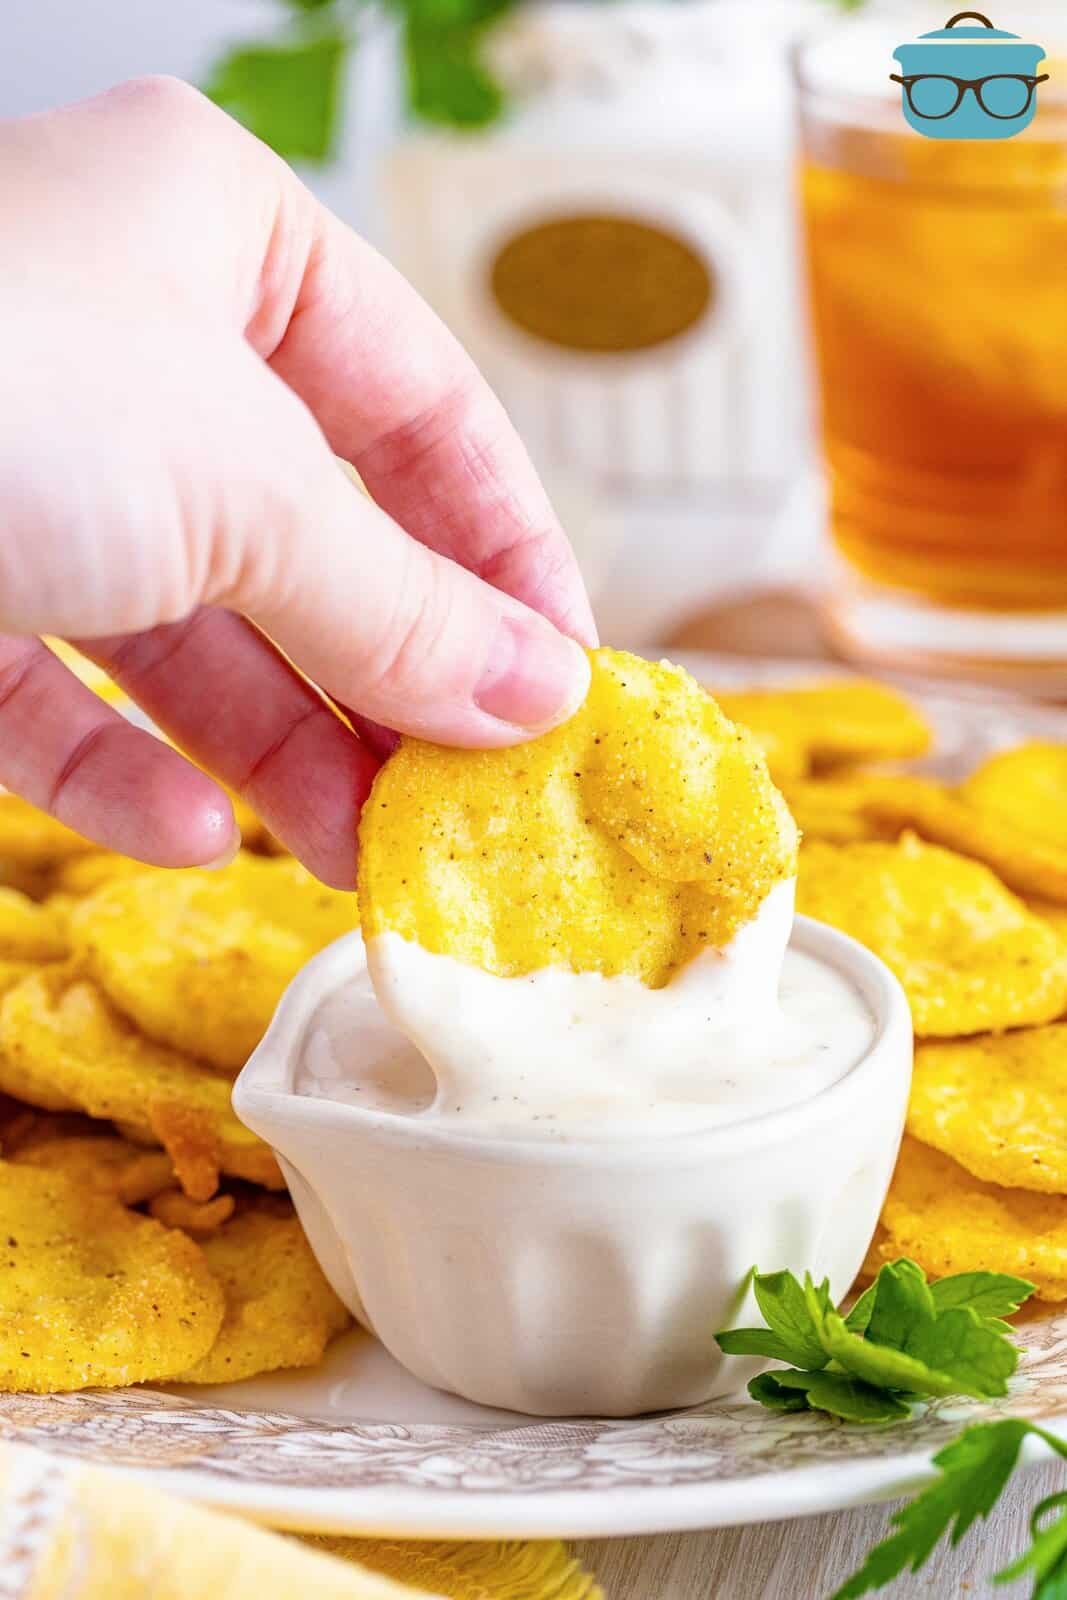 A hand dipping a piece of fried squash in ranch.